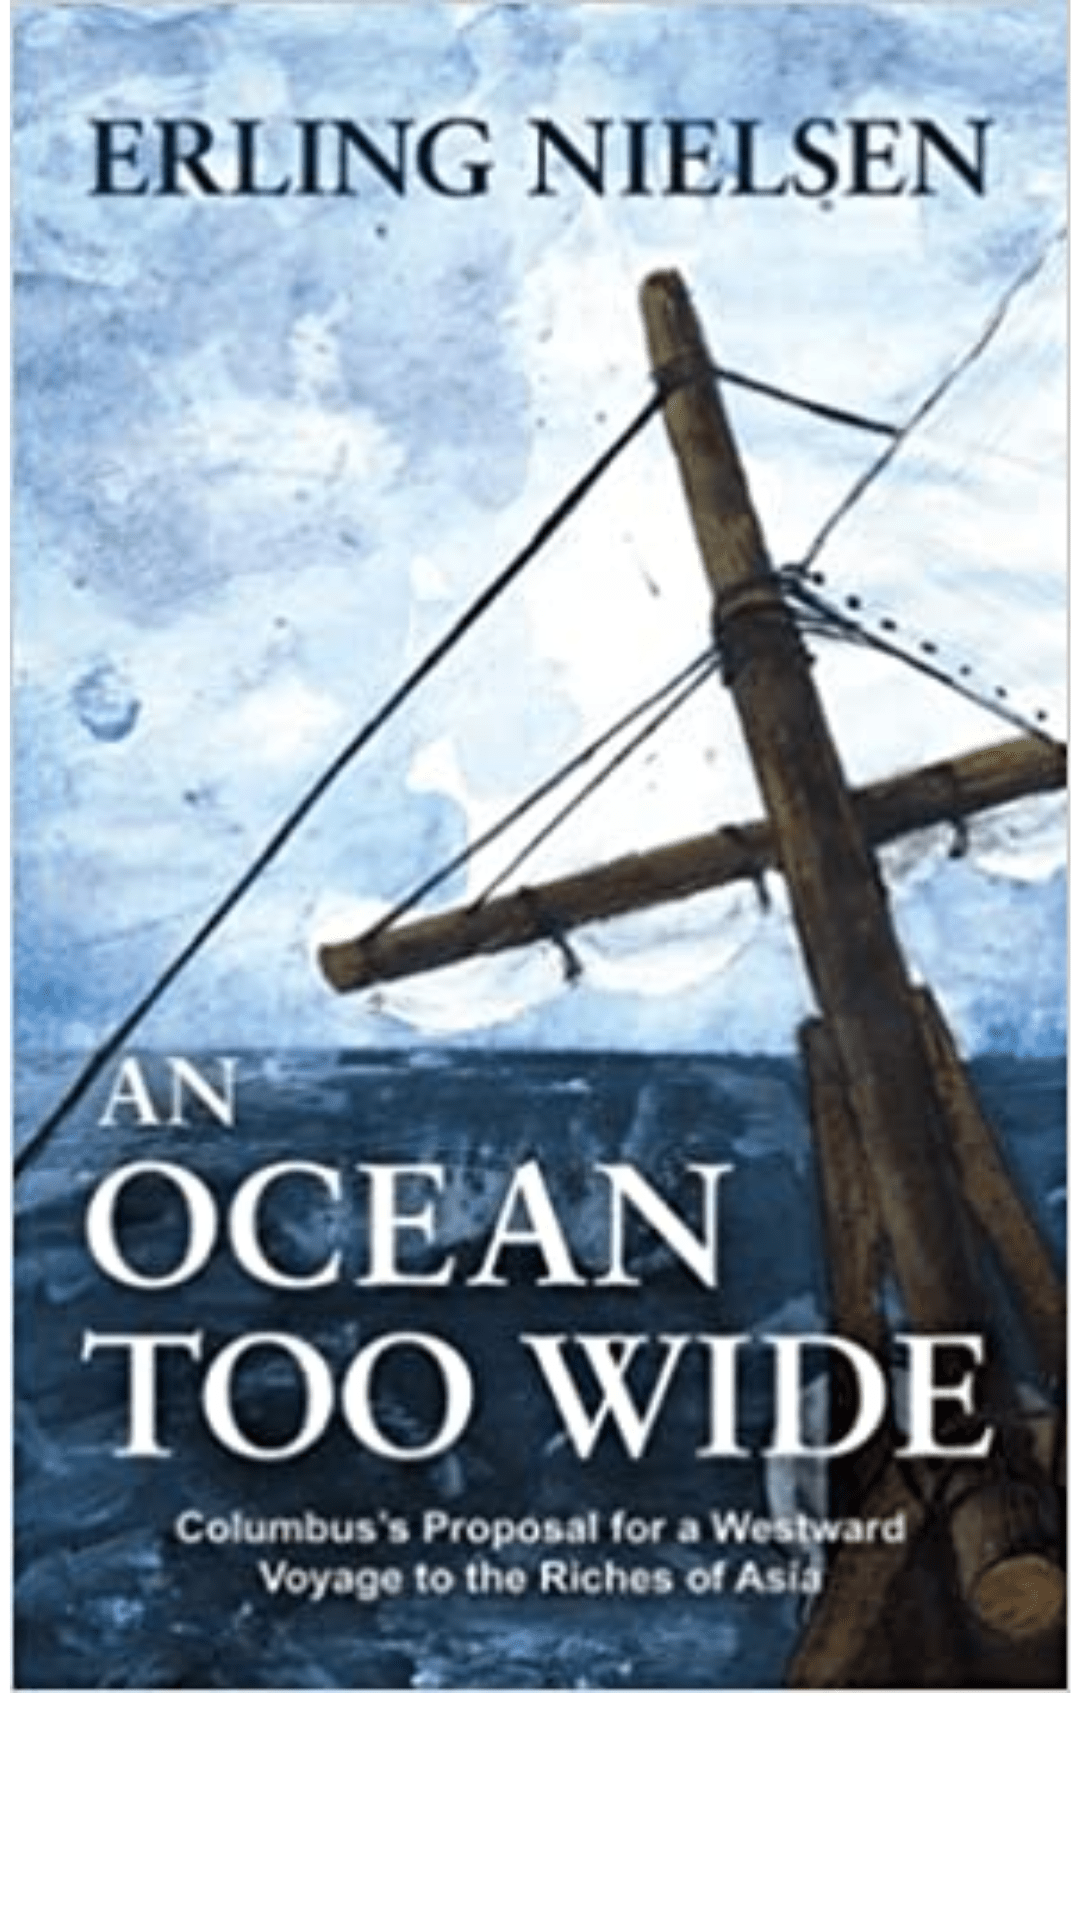 An Ocean Too Wide: Columbus's Proposal for a Westward Voyage to the Riches of Asia